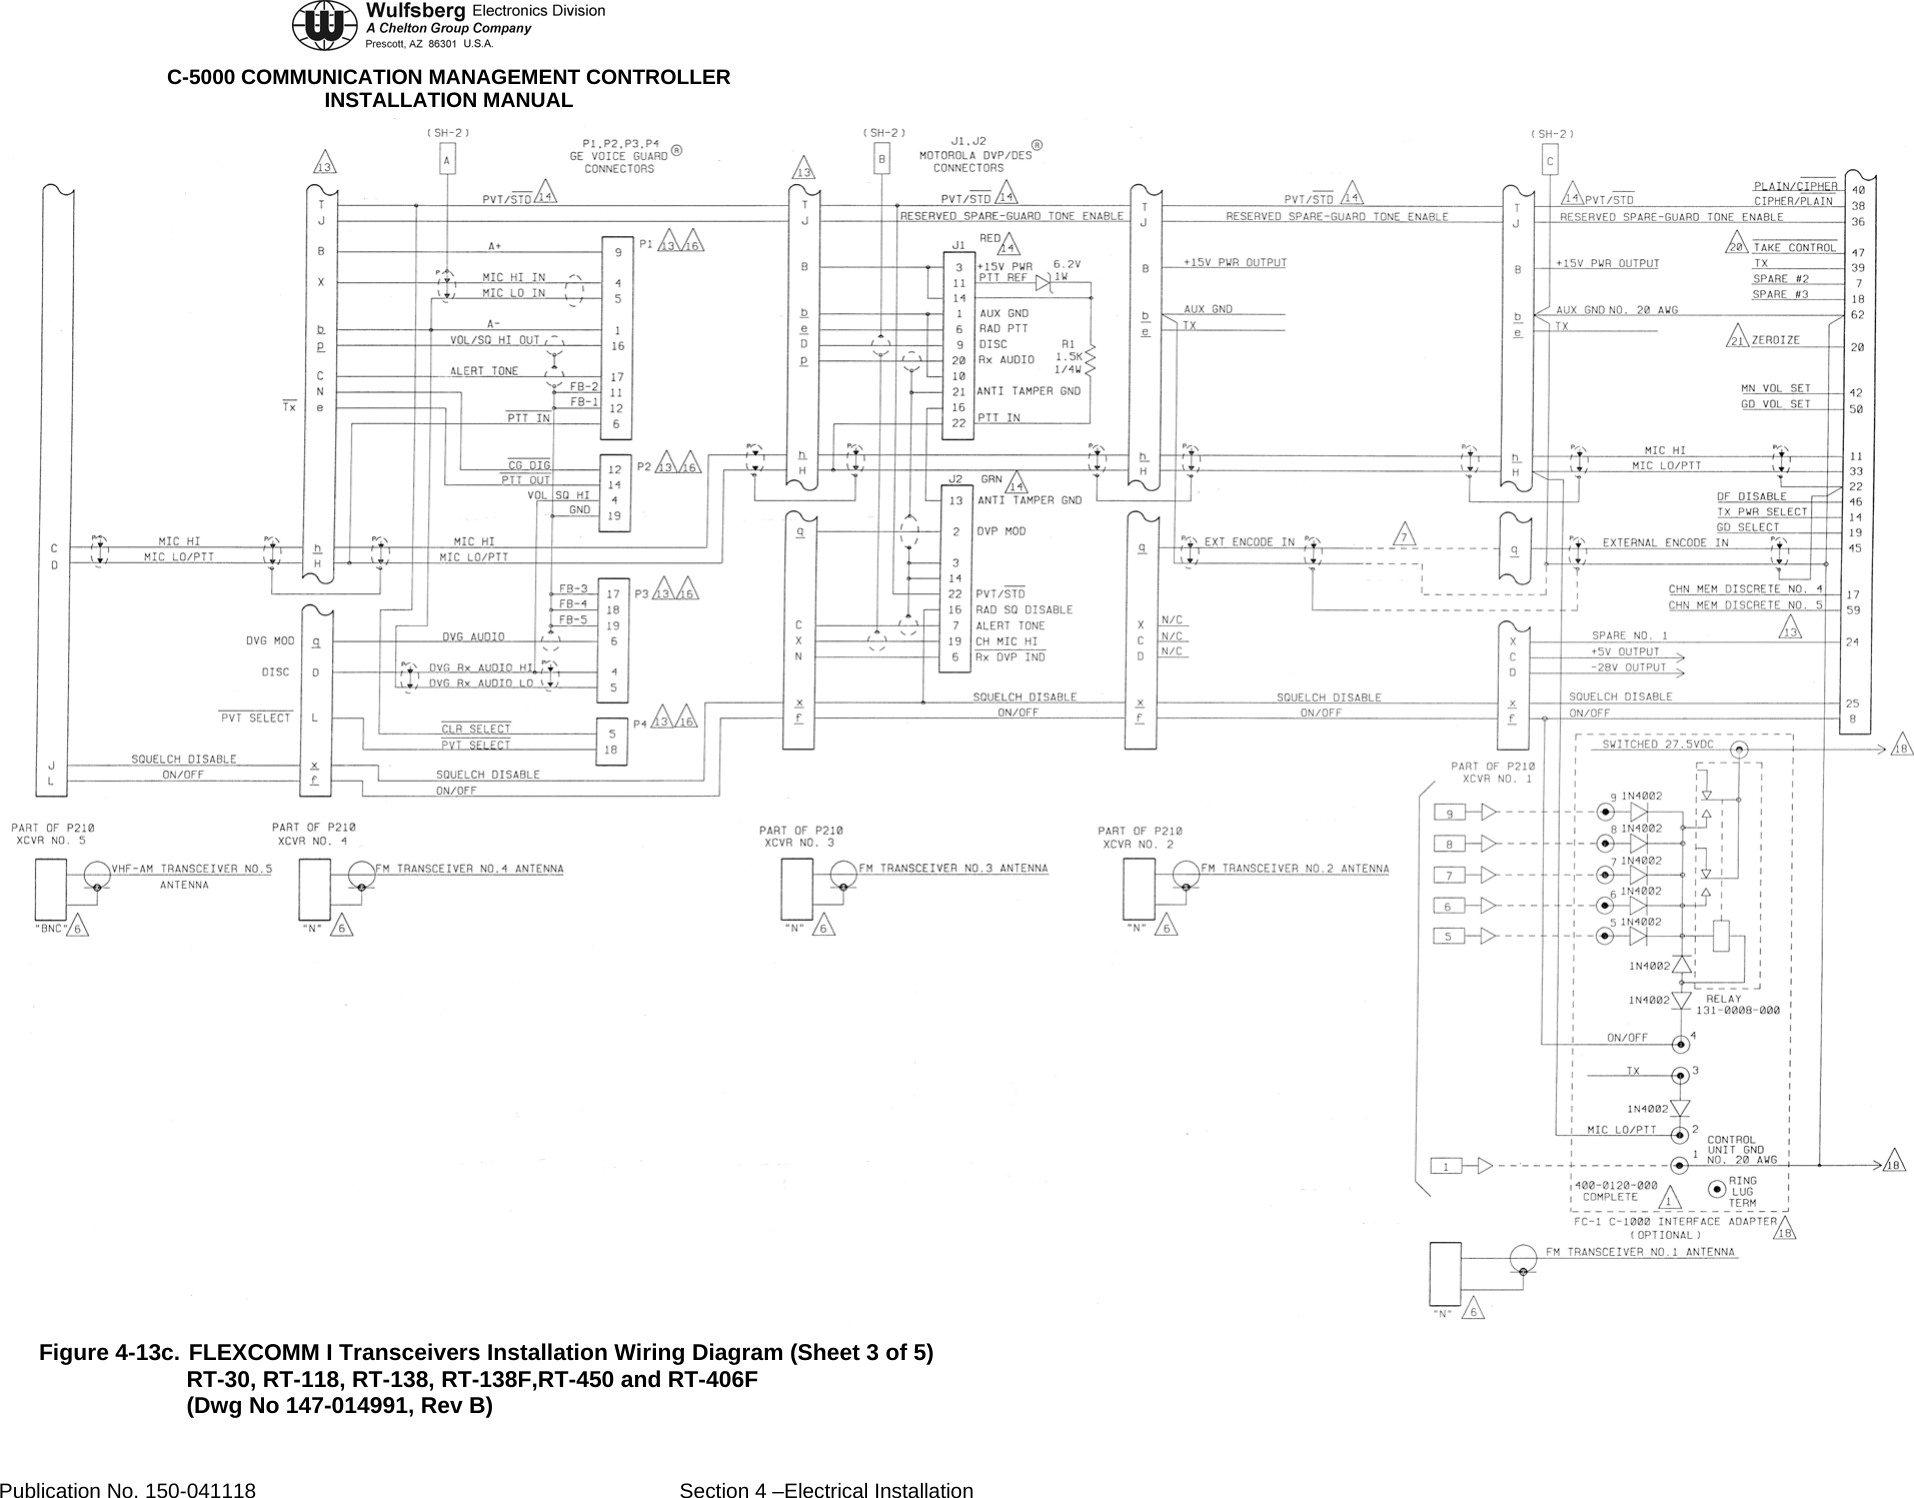  C-5000 COMMUNICATION MANAGEMENT CONTROLLER INSTALLATION MANUAL  Figure 4-13c. FLEXCOMM I Transceivers Installation Wiring Diagram (Sheet 3 of 5) RT-30, RT-118, RT-138, RT-138F,RT-450 and RT-406F (Dwg No 147-014991, Rev B) Publication No. 150-041118  Section 4 –Electrical Installation 